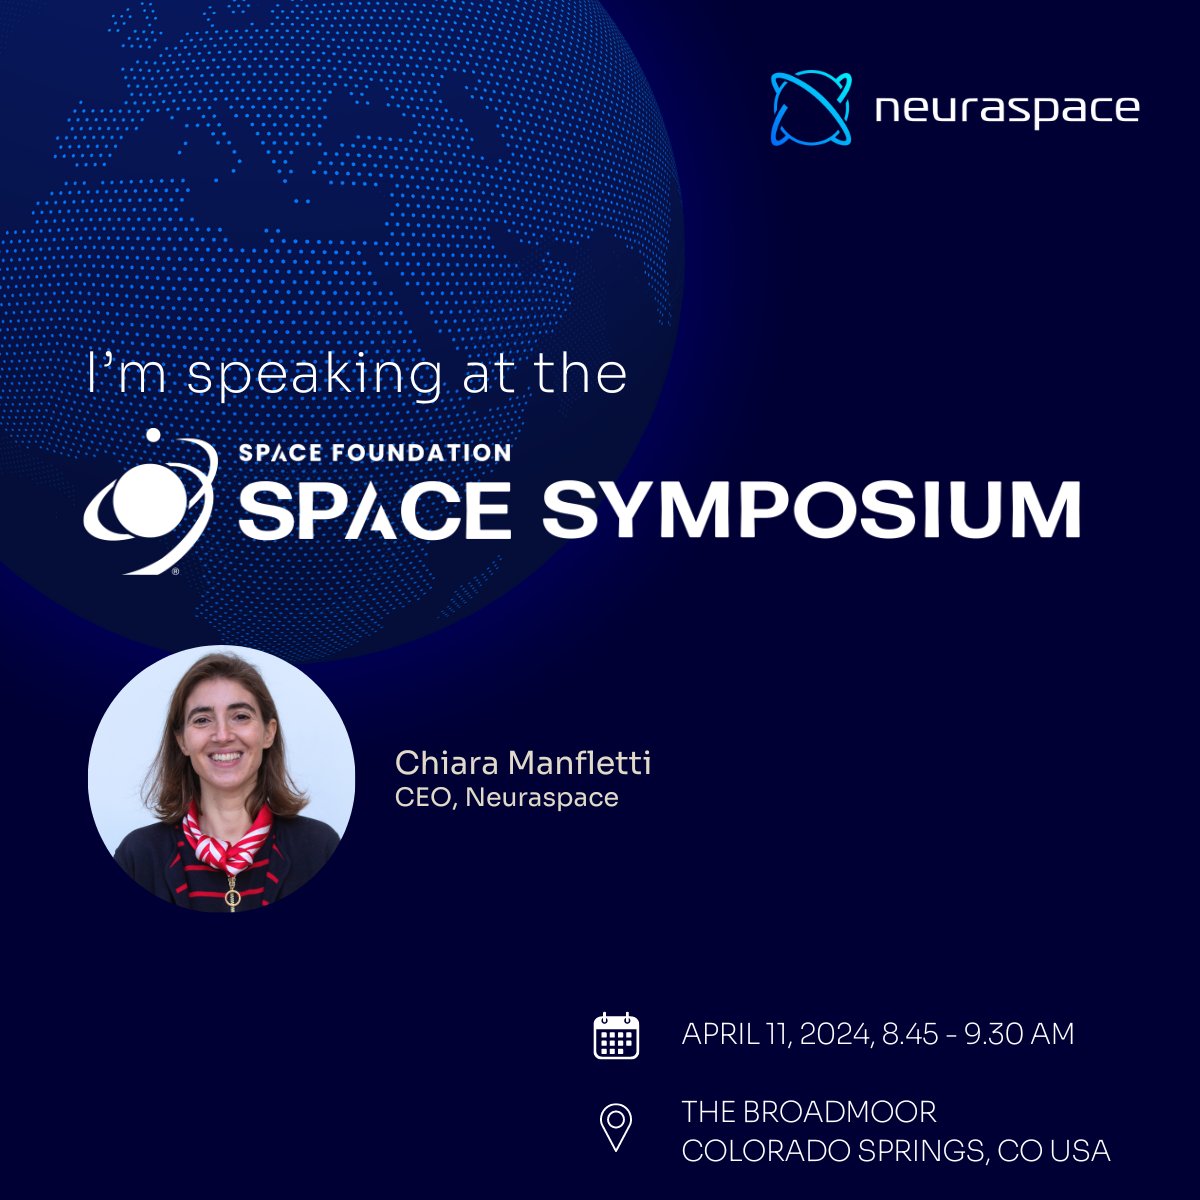 📣Join Neuraspace's Chiara Manfletti at the #SpaceSymposium as she explores how Generative AI is revolutionizing content creation in the space industry. 📅April 11, 8:45 AM 📌The Broadmoor, Colorado Springs, CO USA Know more: eu1.hubs.ly/H08lfkL0 #SpaceSymposium